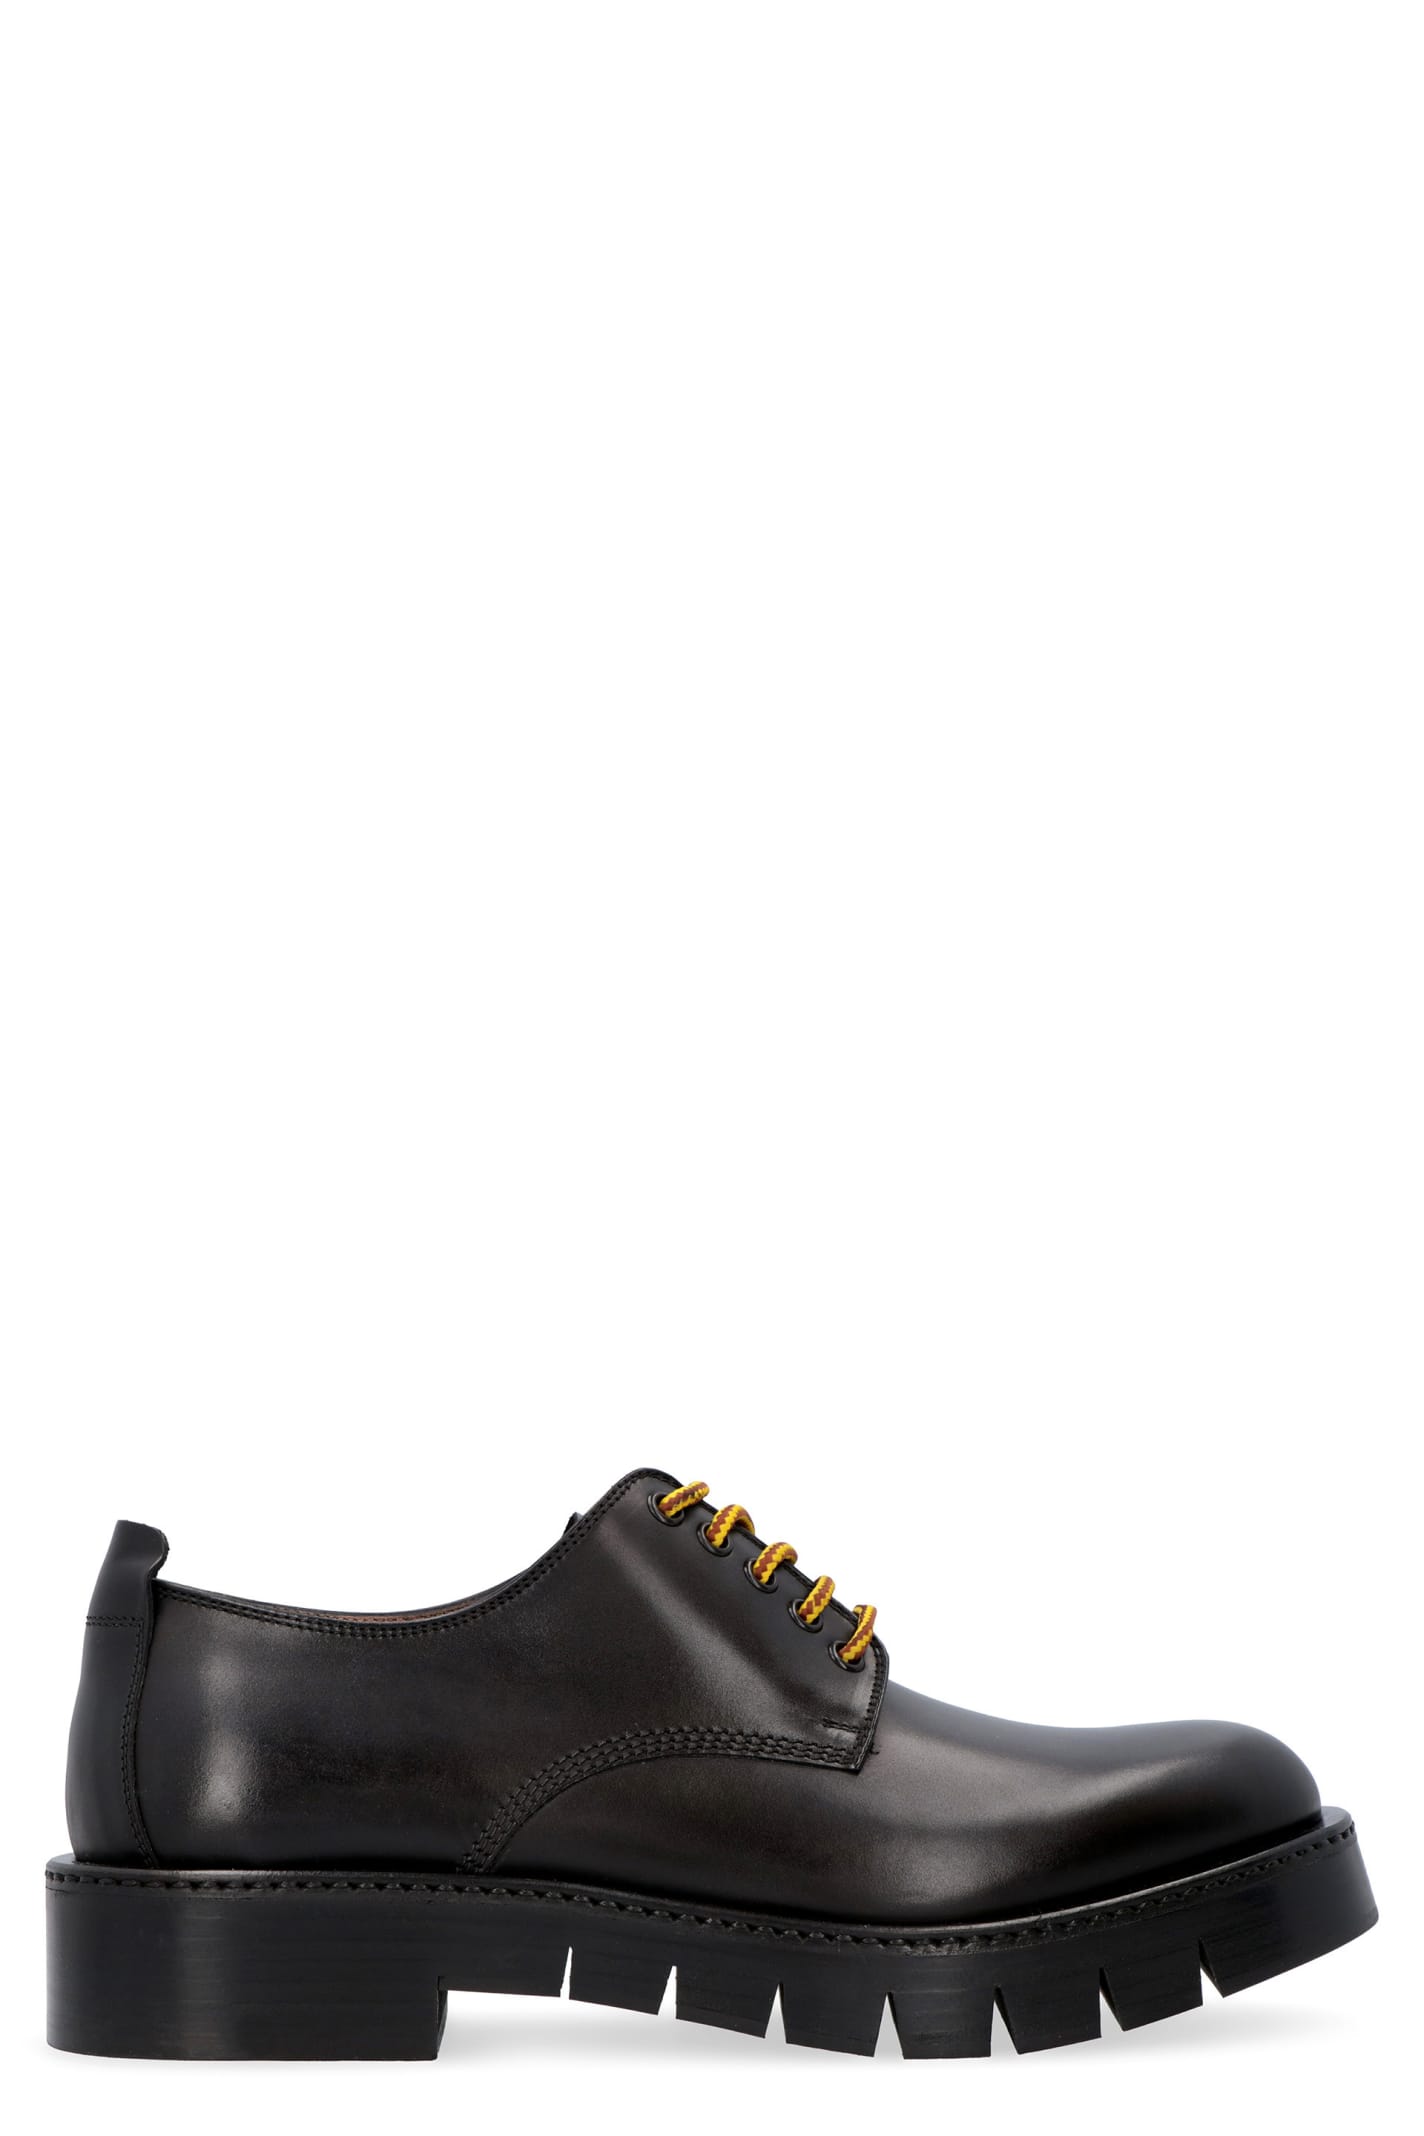 Salvatore Ferragamo Rudy Leather Lace-up Shoes